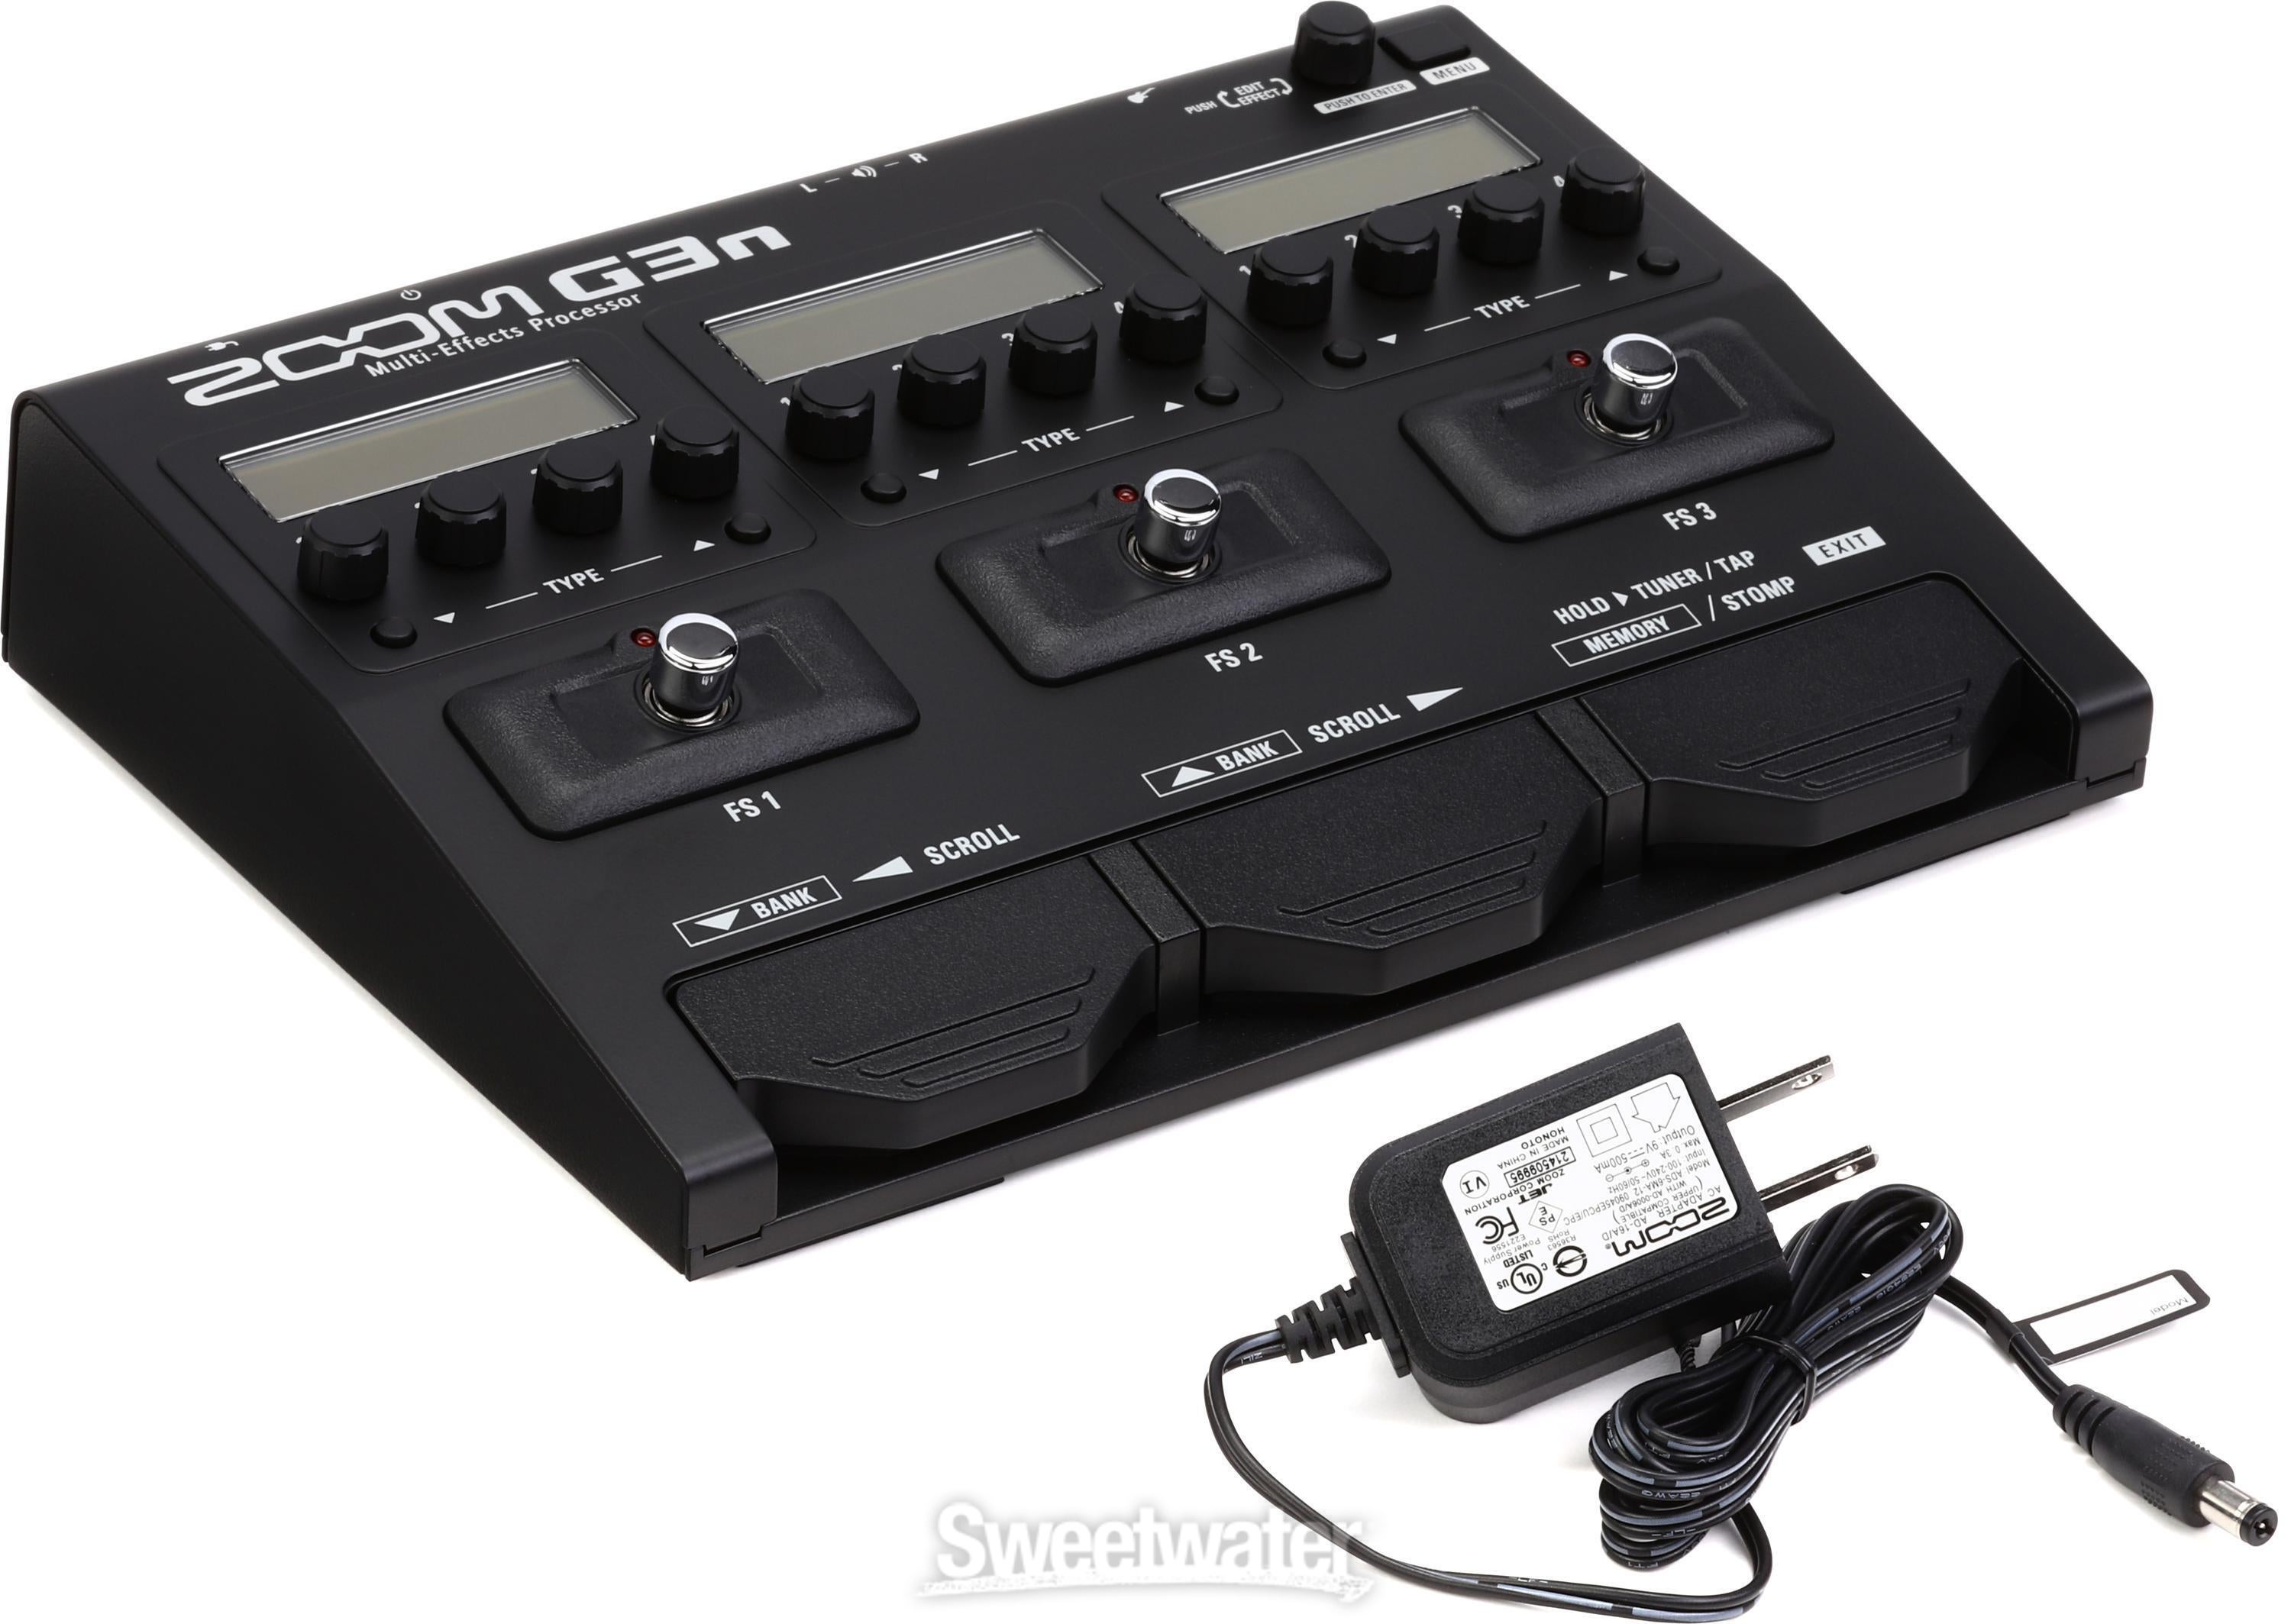 Zoom G3n Multi-effects Processor Reviews | Sweetwater